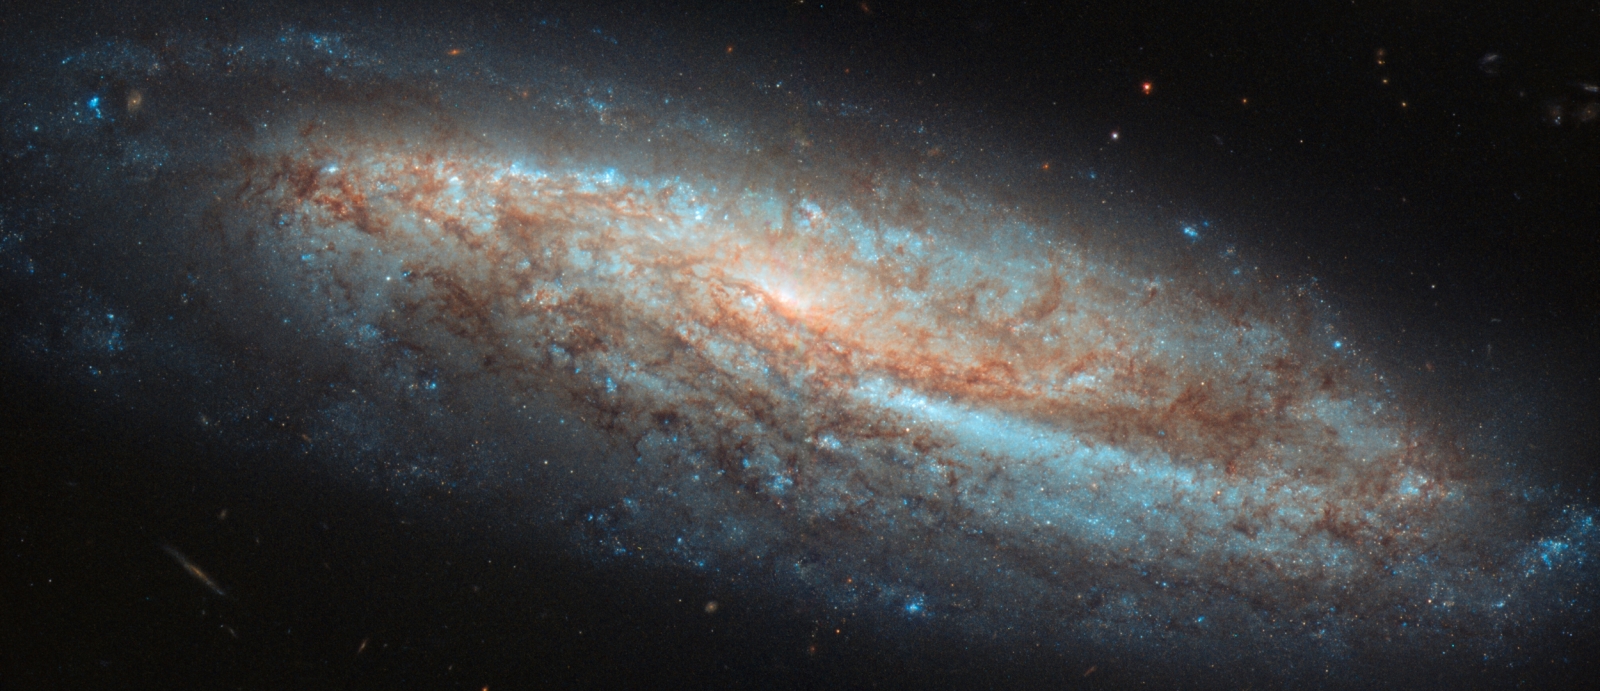 Reed-Solomon codes have enabled the Hubble Telescope to transmit images like this back to scientists on Earth. The galaxy depicted in this Hubble image is a barred spiral galaxy, known as NGC 7541, in the constellation of Pisces. Photo courtesy of NASA